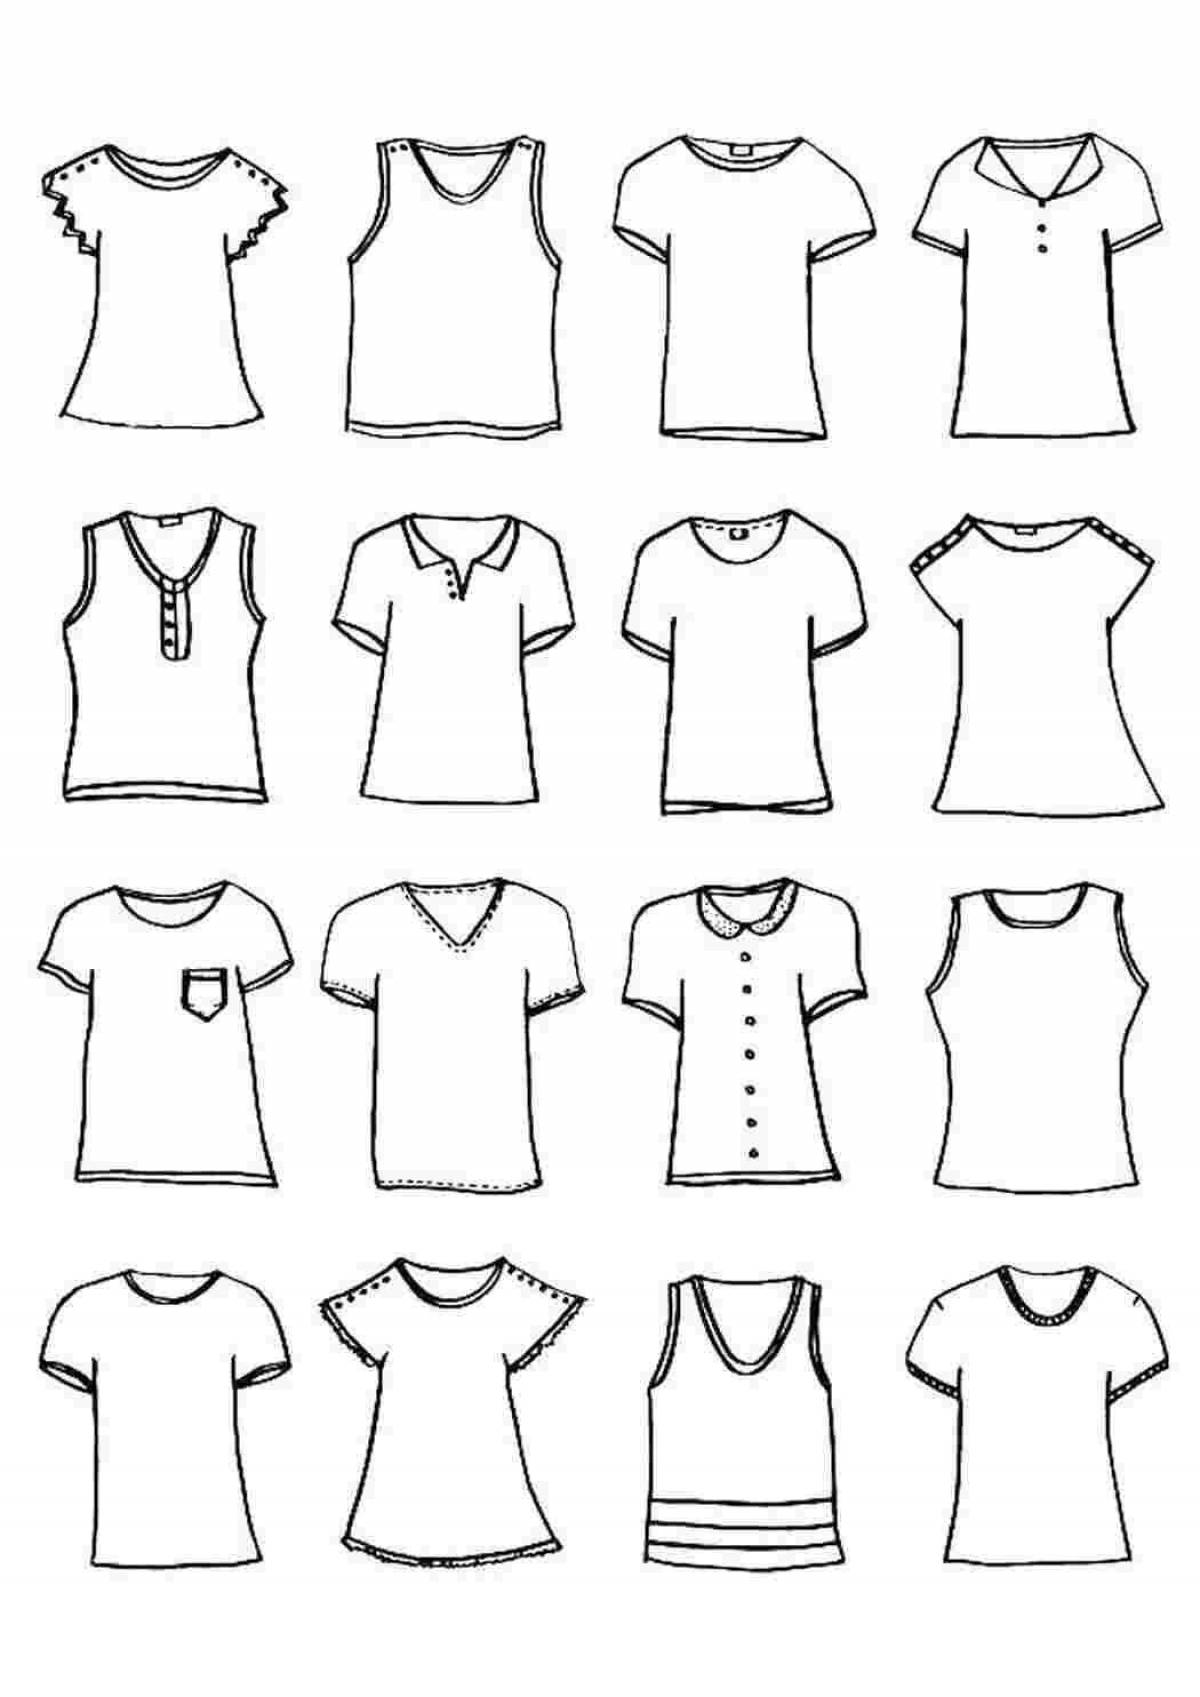 Colorful t-shirt coloring page for kids to have fun